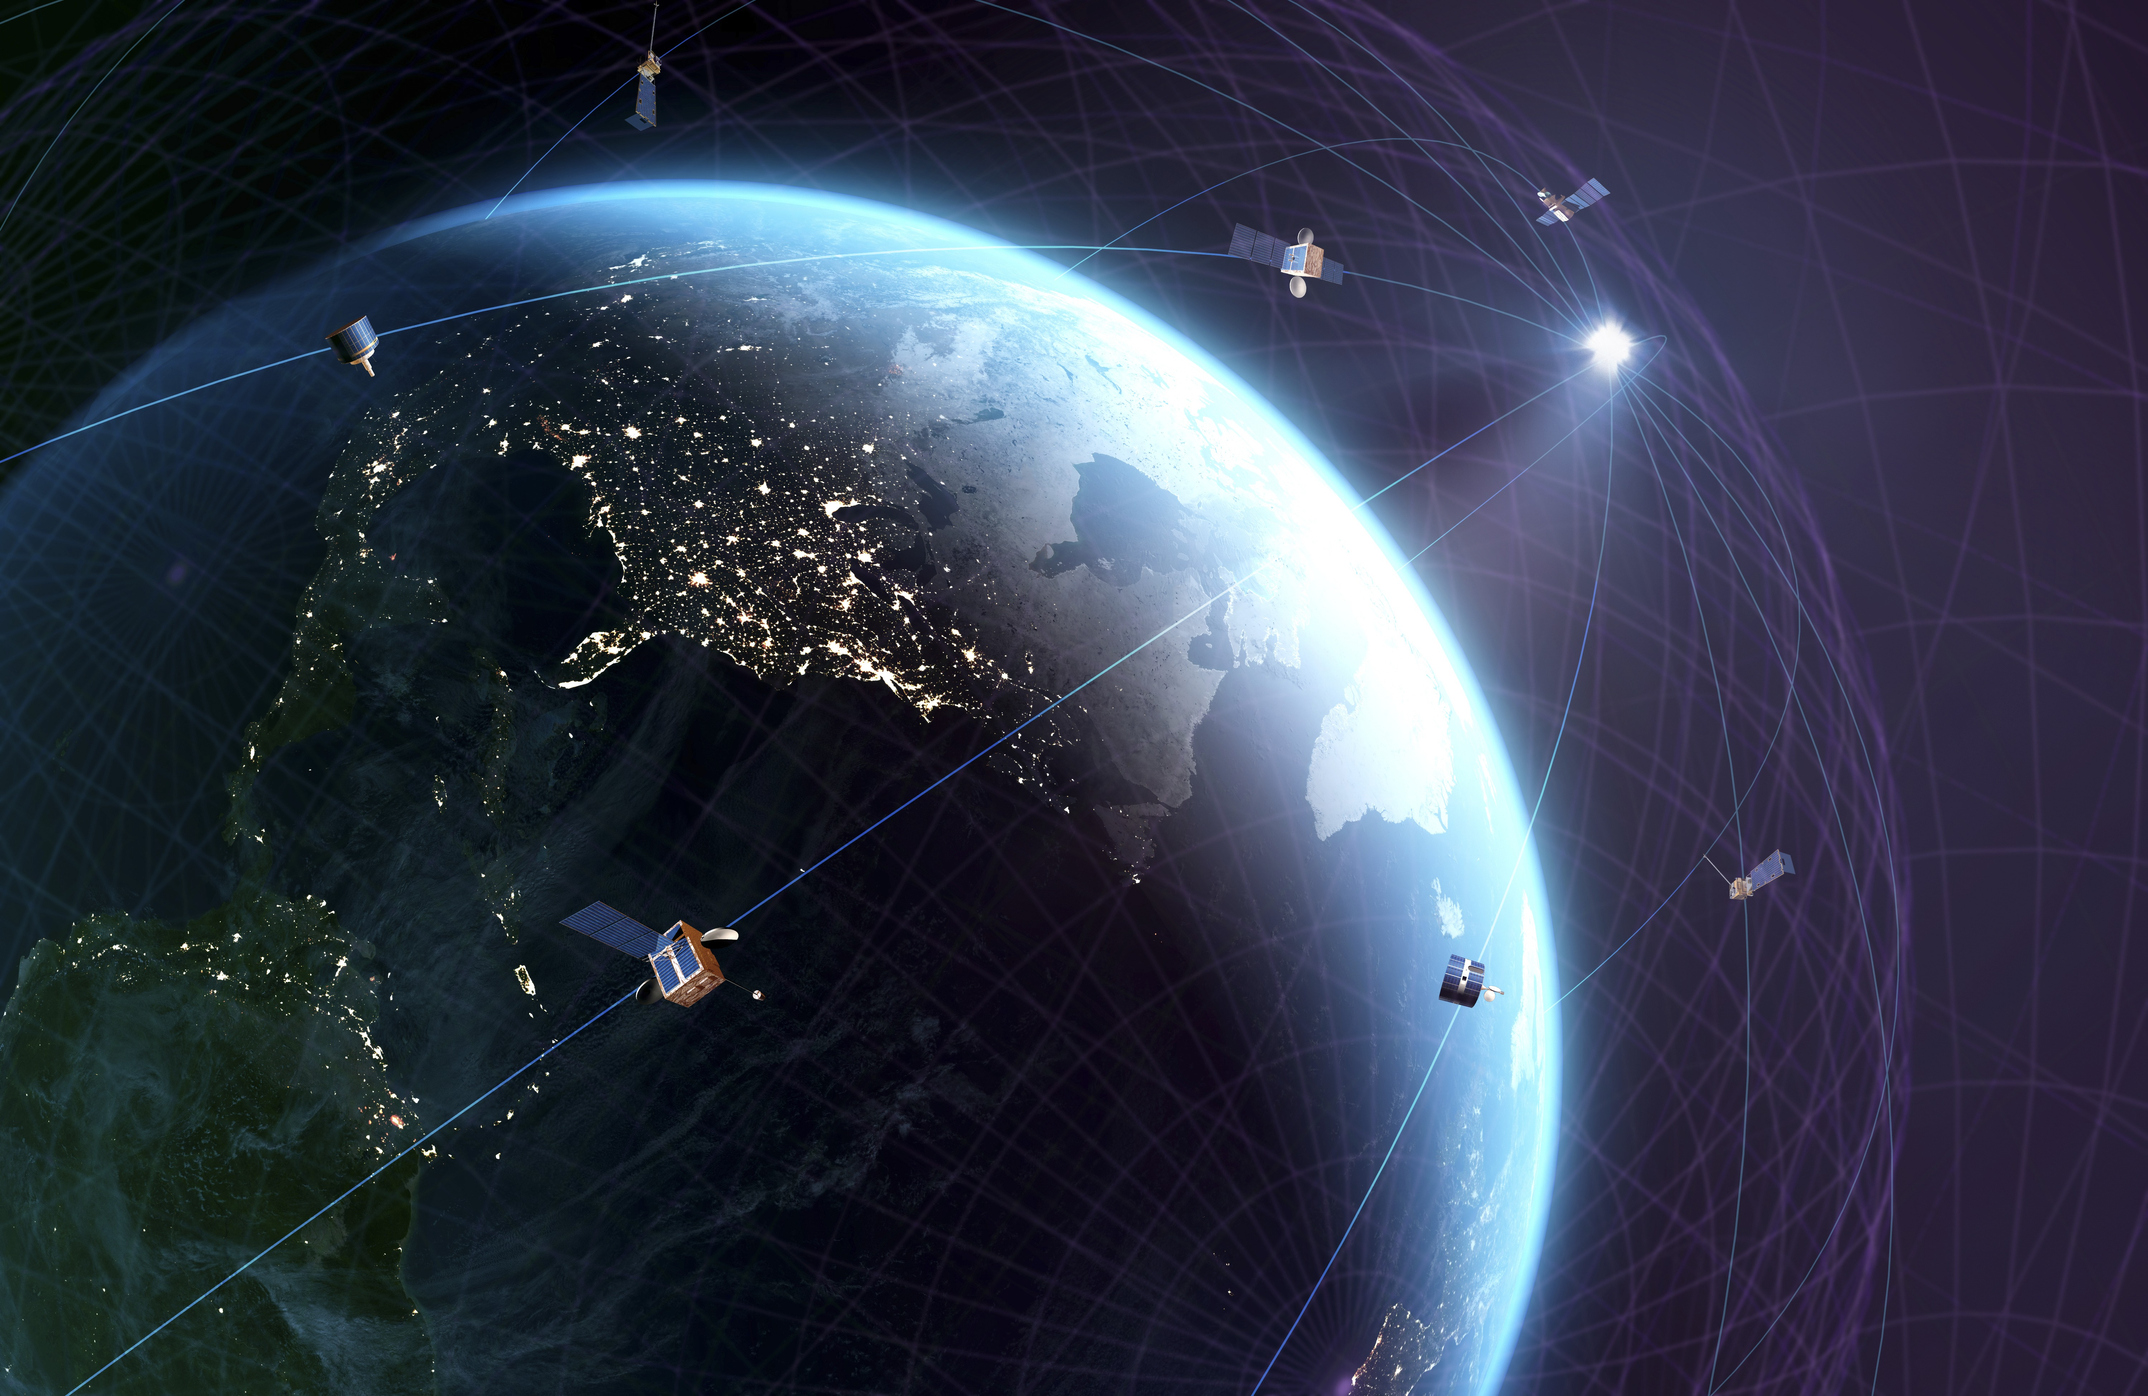 Global satellite communications. Conceptual representation of a global network of communications satellites, such as the Starlink satellites.